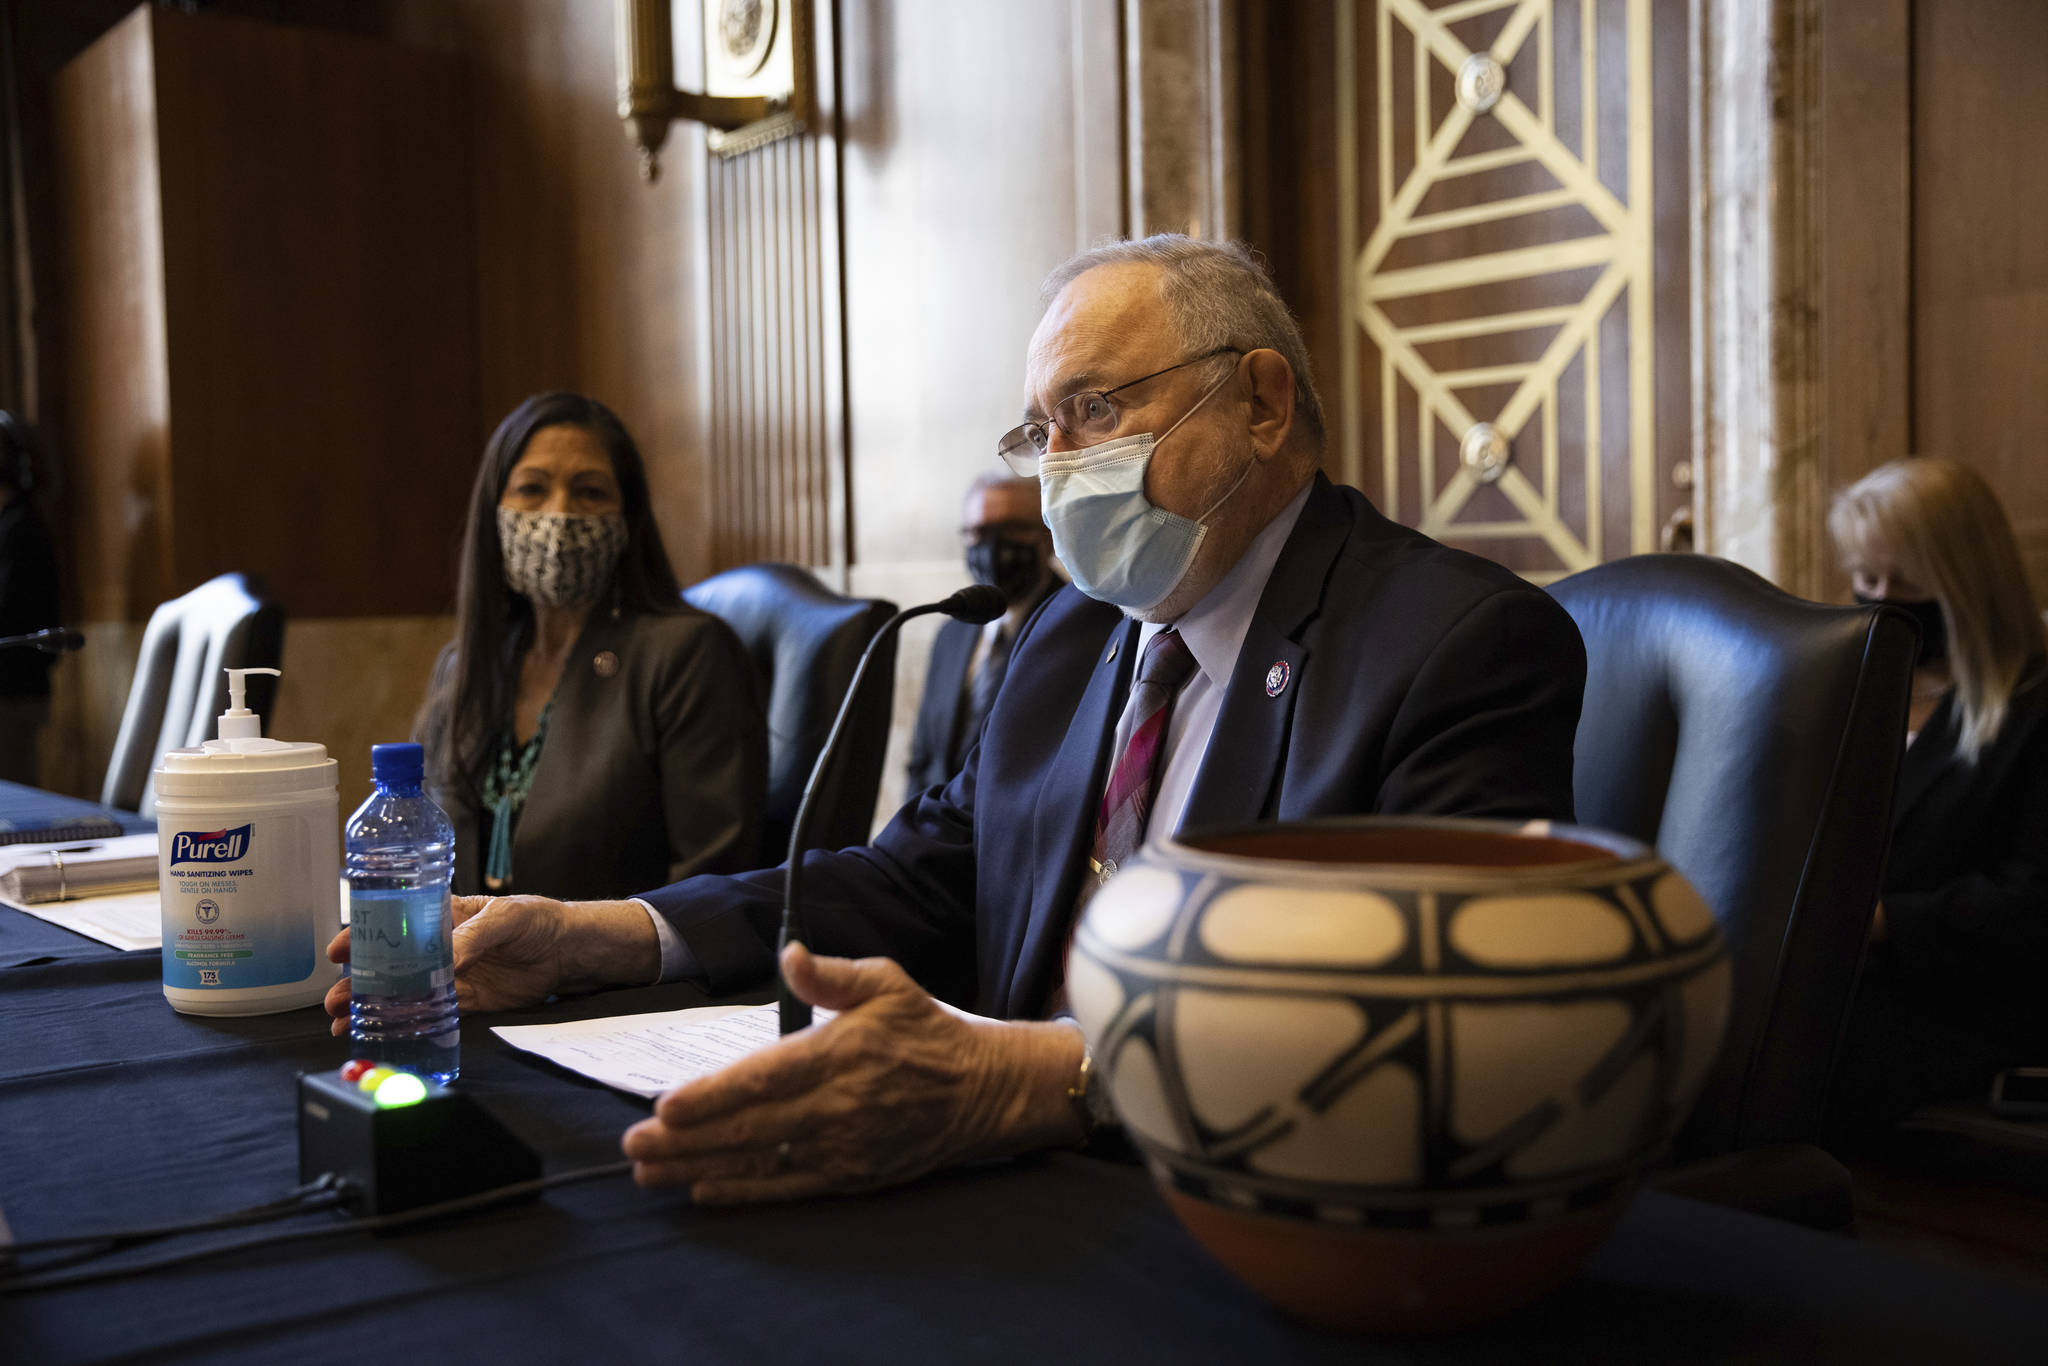 In this Feb. 23, 2021 file photo, U.S. Rep. Don Young, R-Alaska, speaks during the Senate Committee on Energy and Natural Resources hearing on Capitol Hill in Washington. Young announced Wednesday, April 27, 2021, that he will seek re-election to the seat he has held since 1973. (Graeme Jennings/Washington Examiner via AP, Pool_